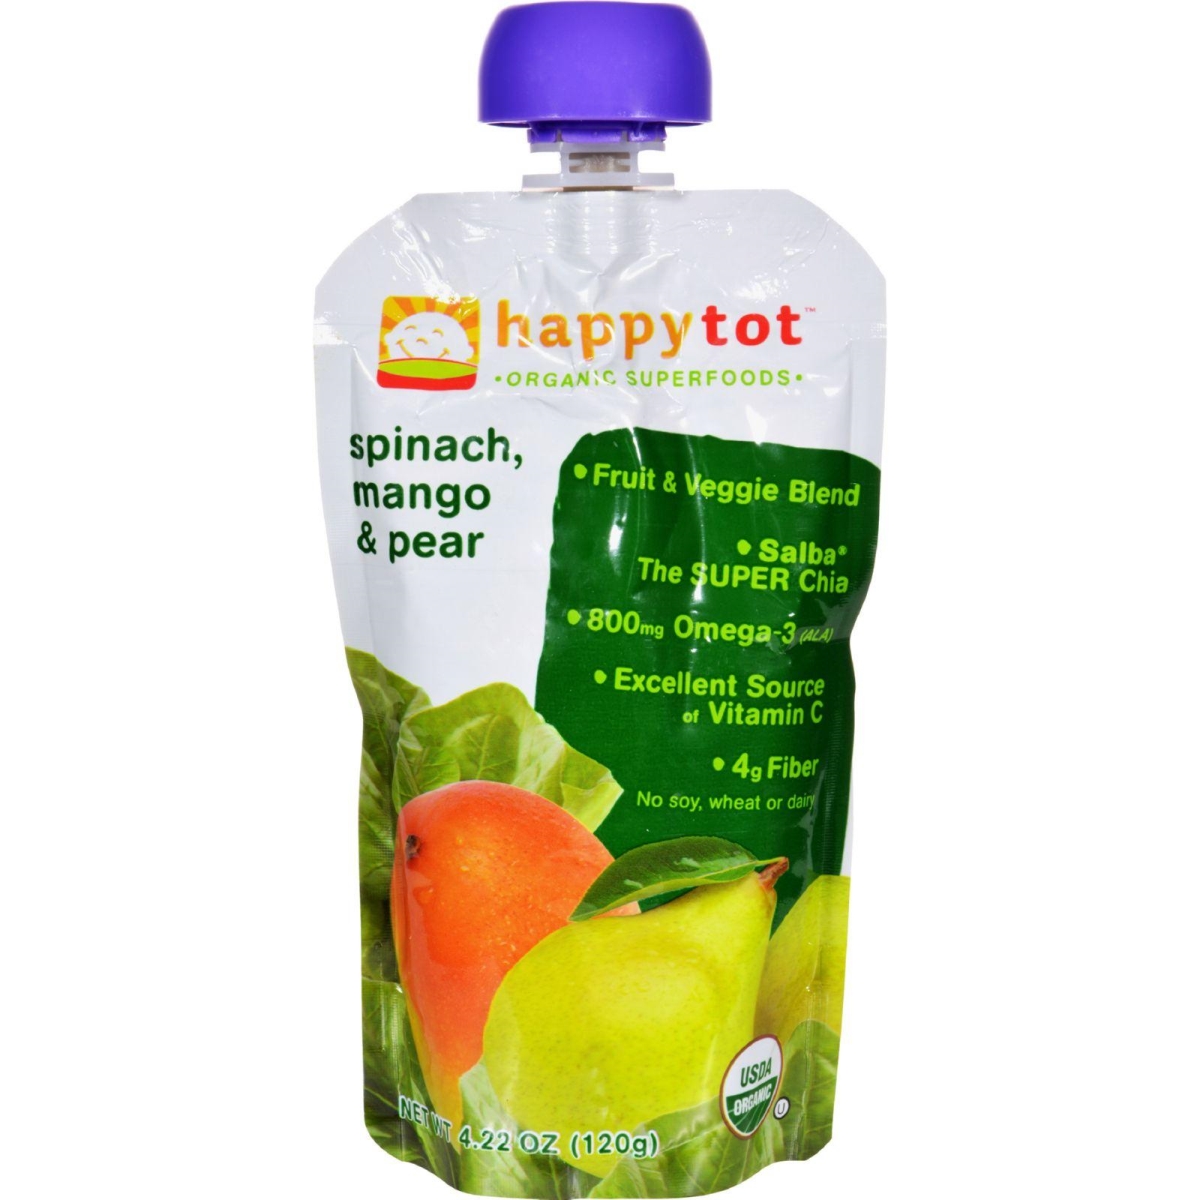 4.22 Oz Happytot Organic Superfoods Spinach Mango & Pear, Case Of 16